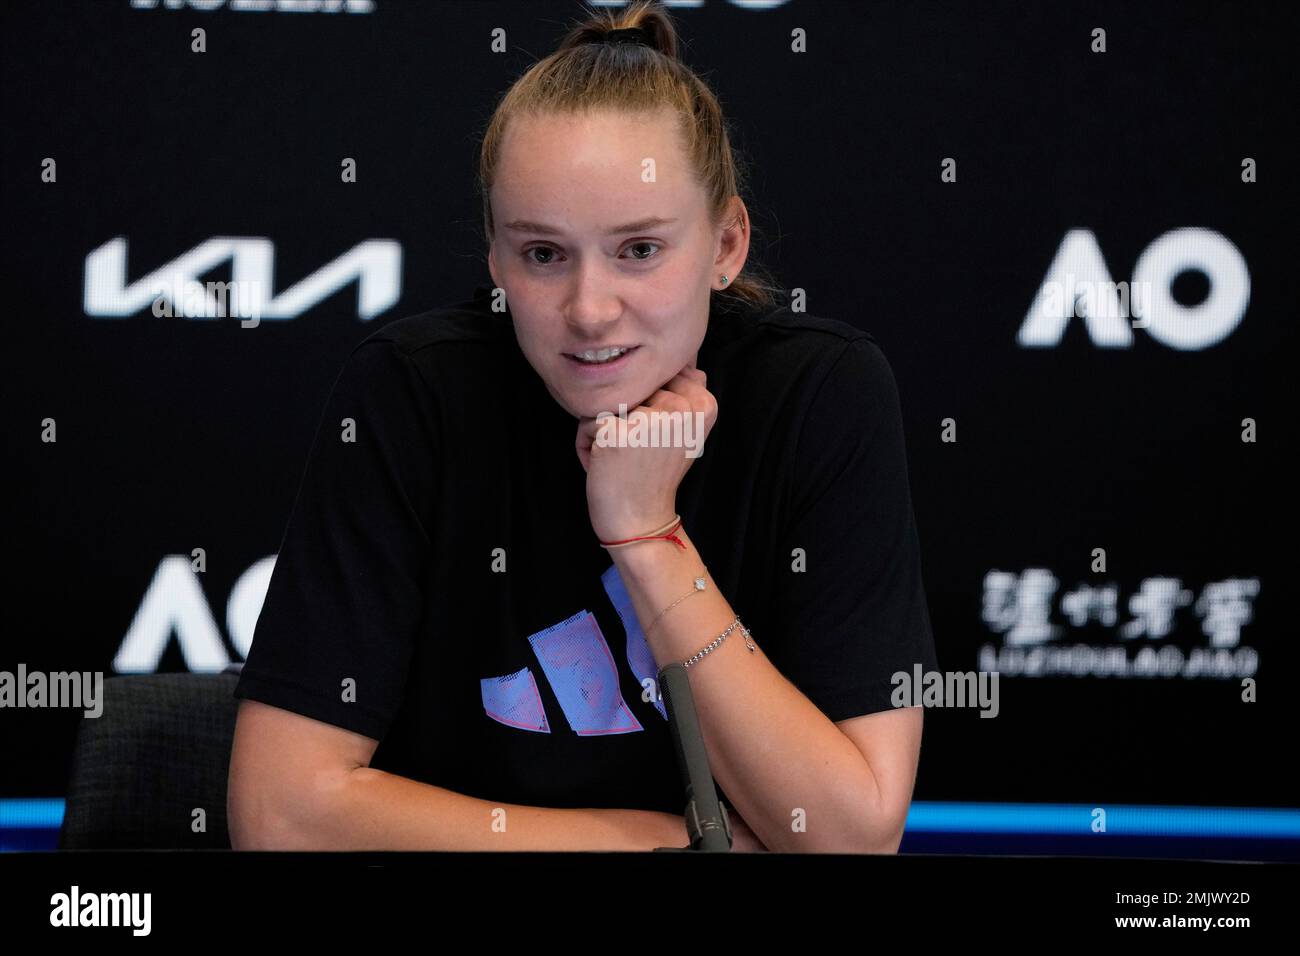 Elena Rybakina of Kazakhstan speaks during a press conference following her loss to Aryna Sabalenka of Belarus in the womens singles final at the Australian Open tennis championship in Melbourne, Australia, Saturday,